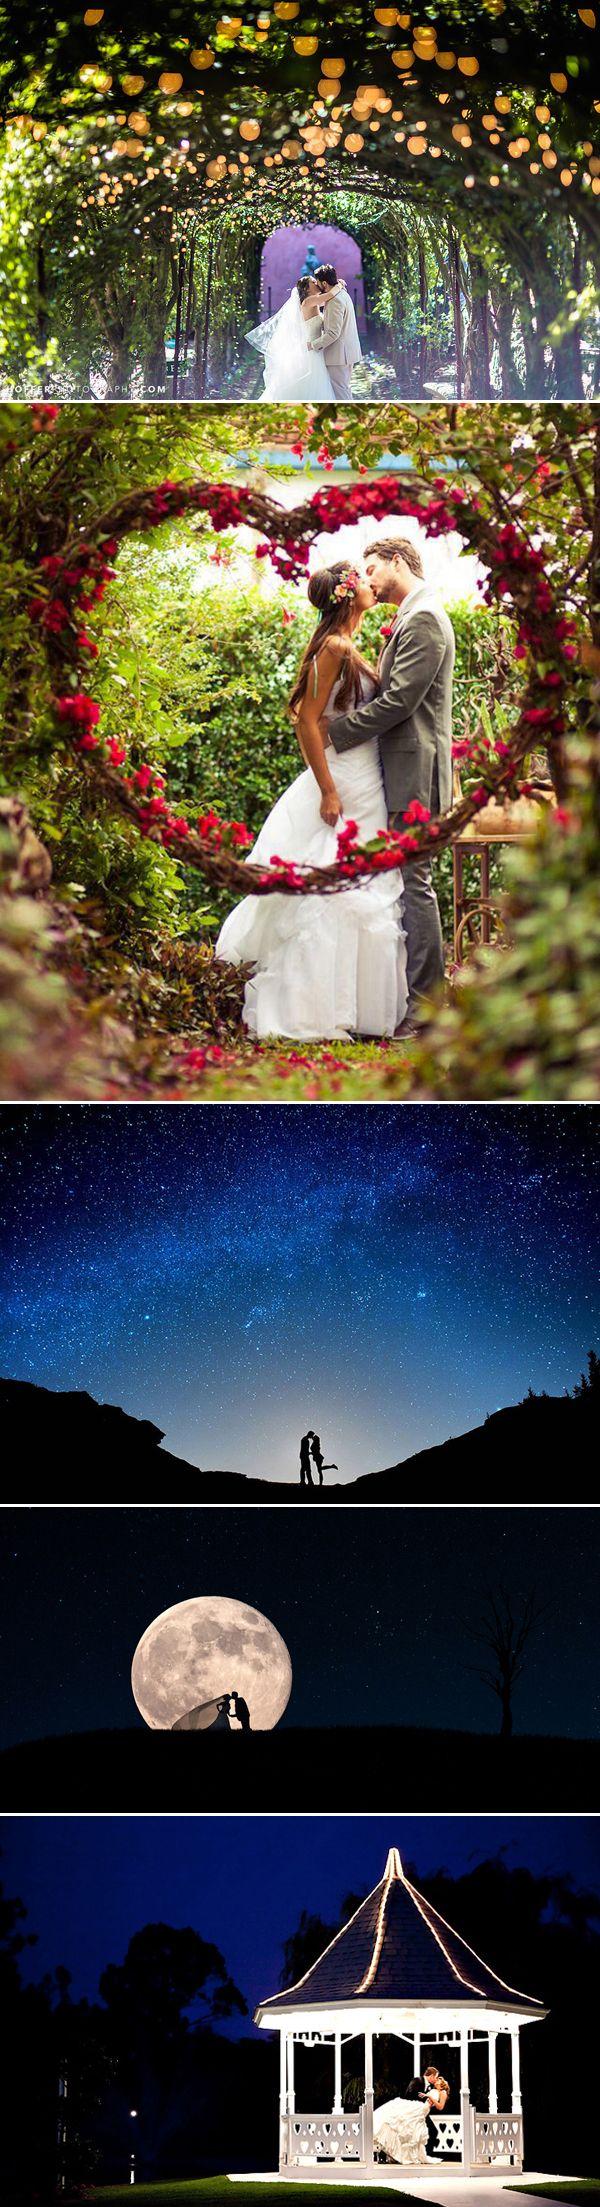 Hochzeit - 24 Wedding Photos That Look Like They Belong In Fairy Tales